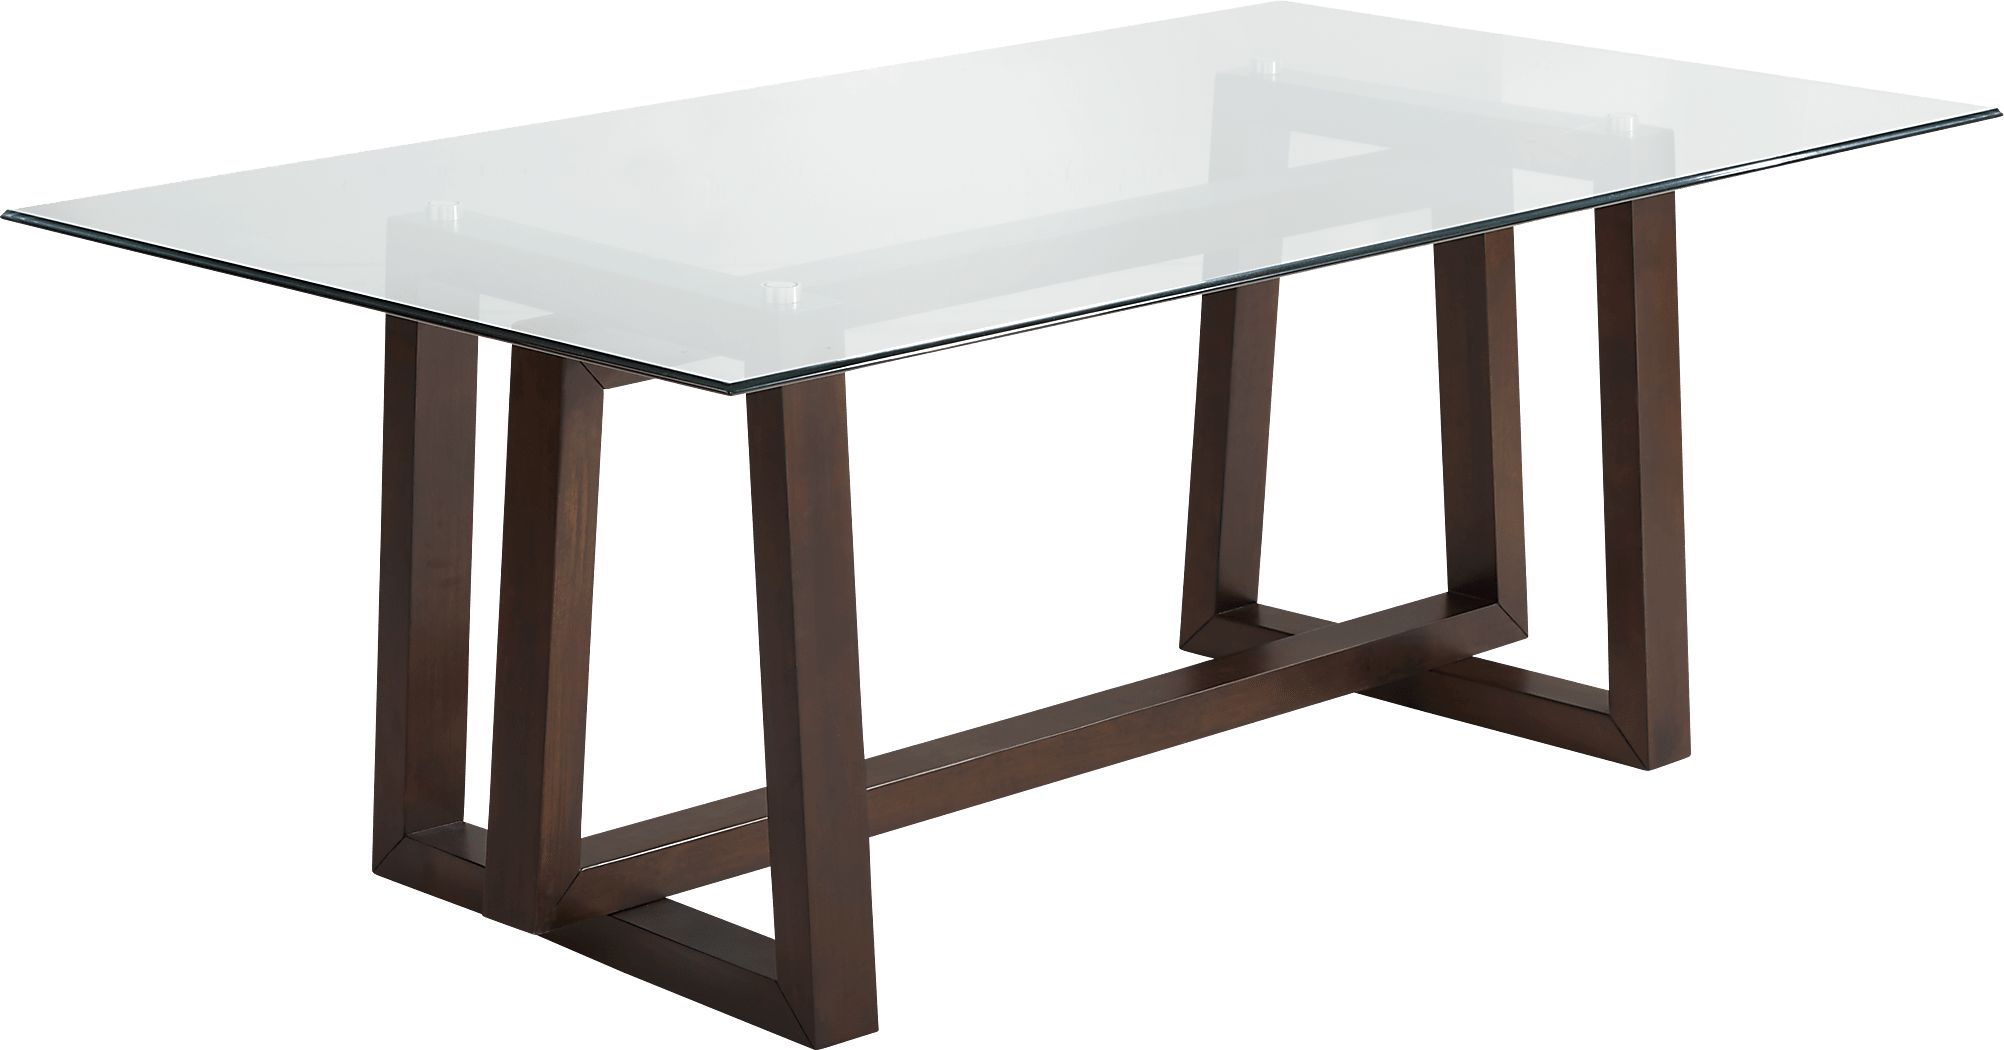  rectangle Dining Table